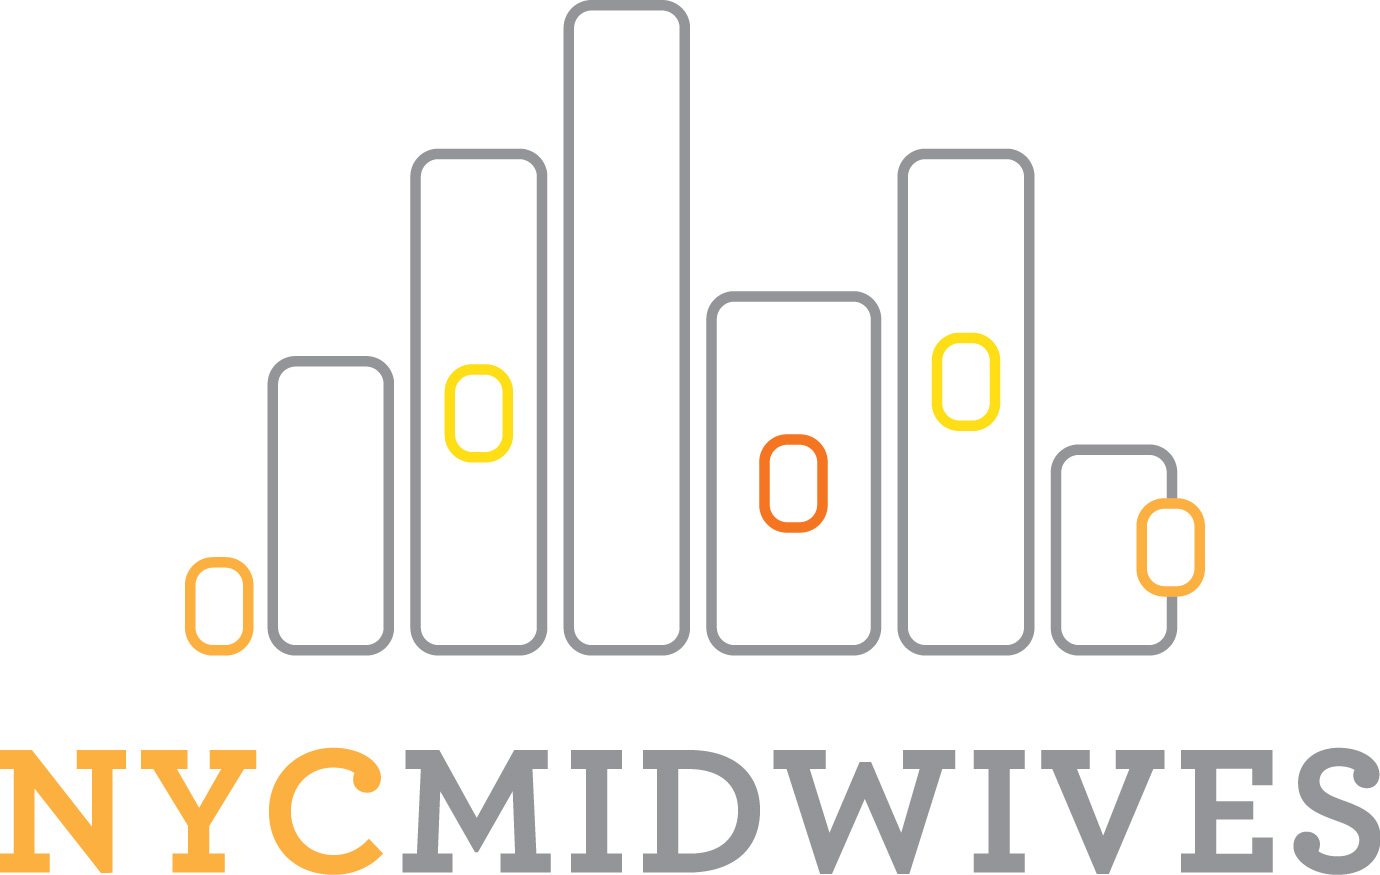 Nyc Midwives logo